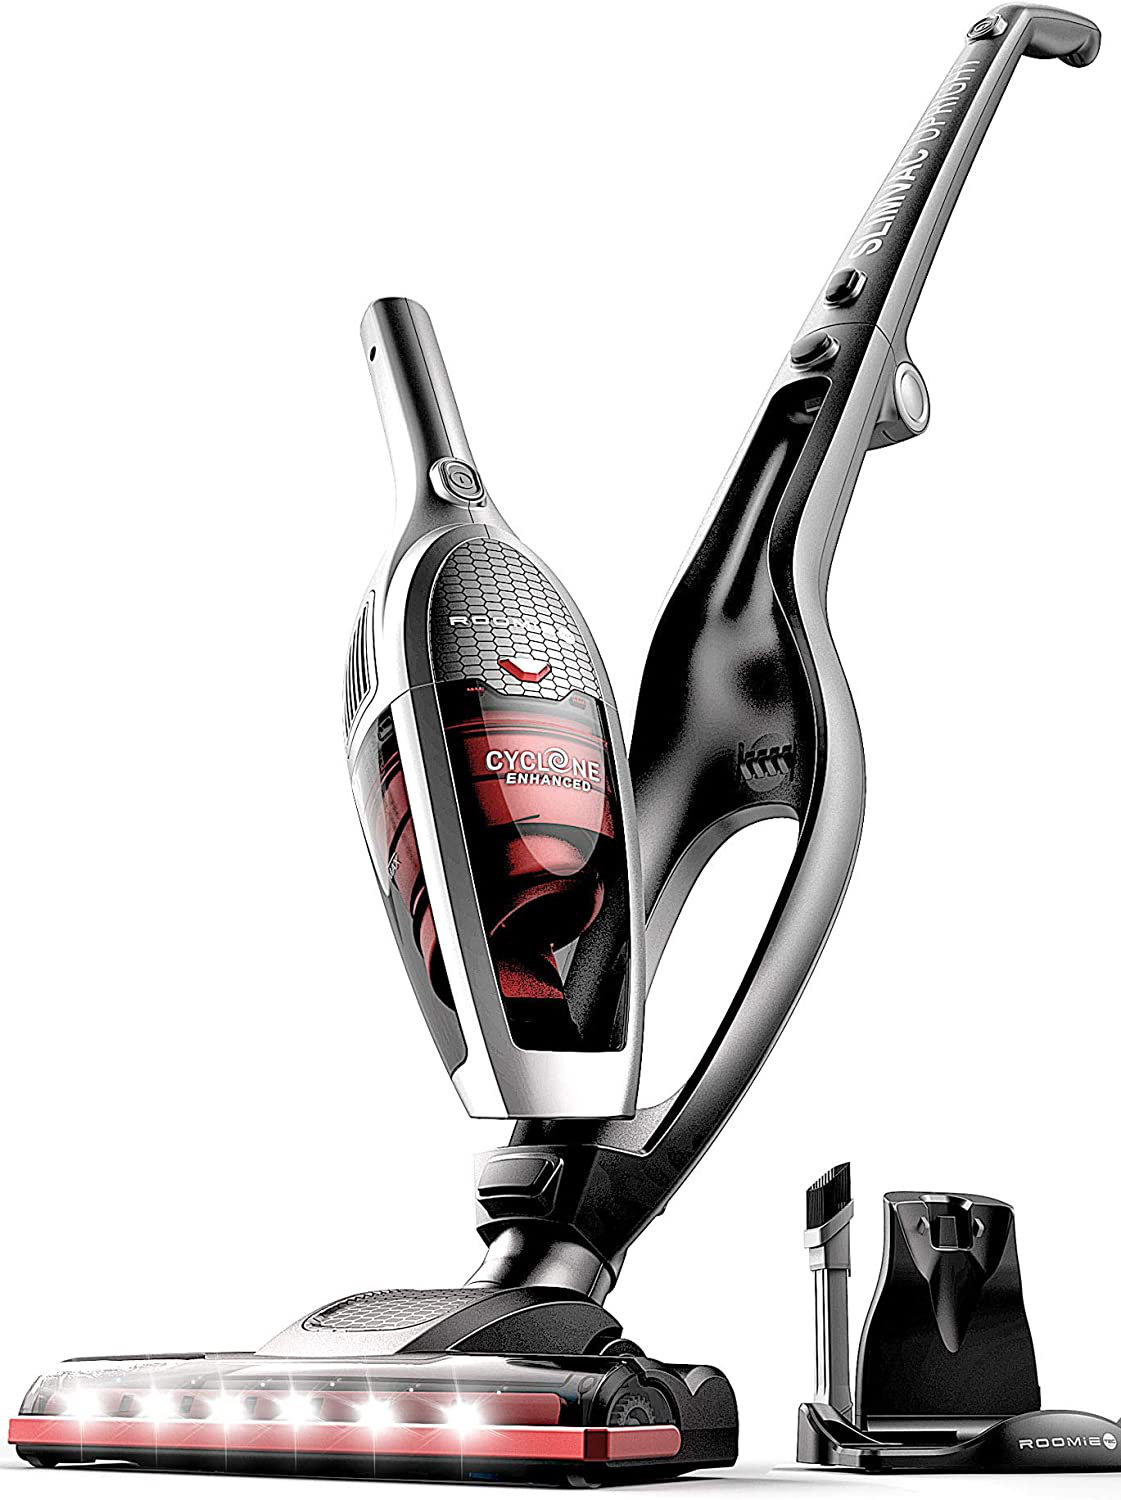  syvio Cordless Vacuum Cleaner Rechargeable with